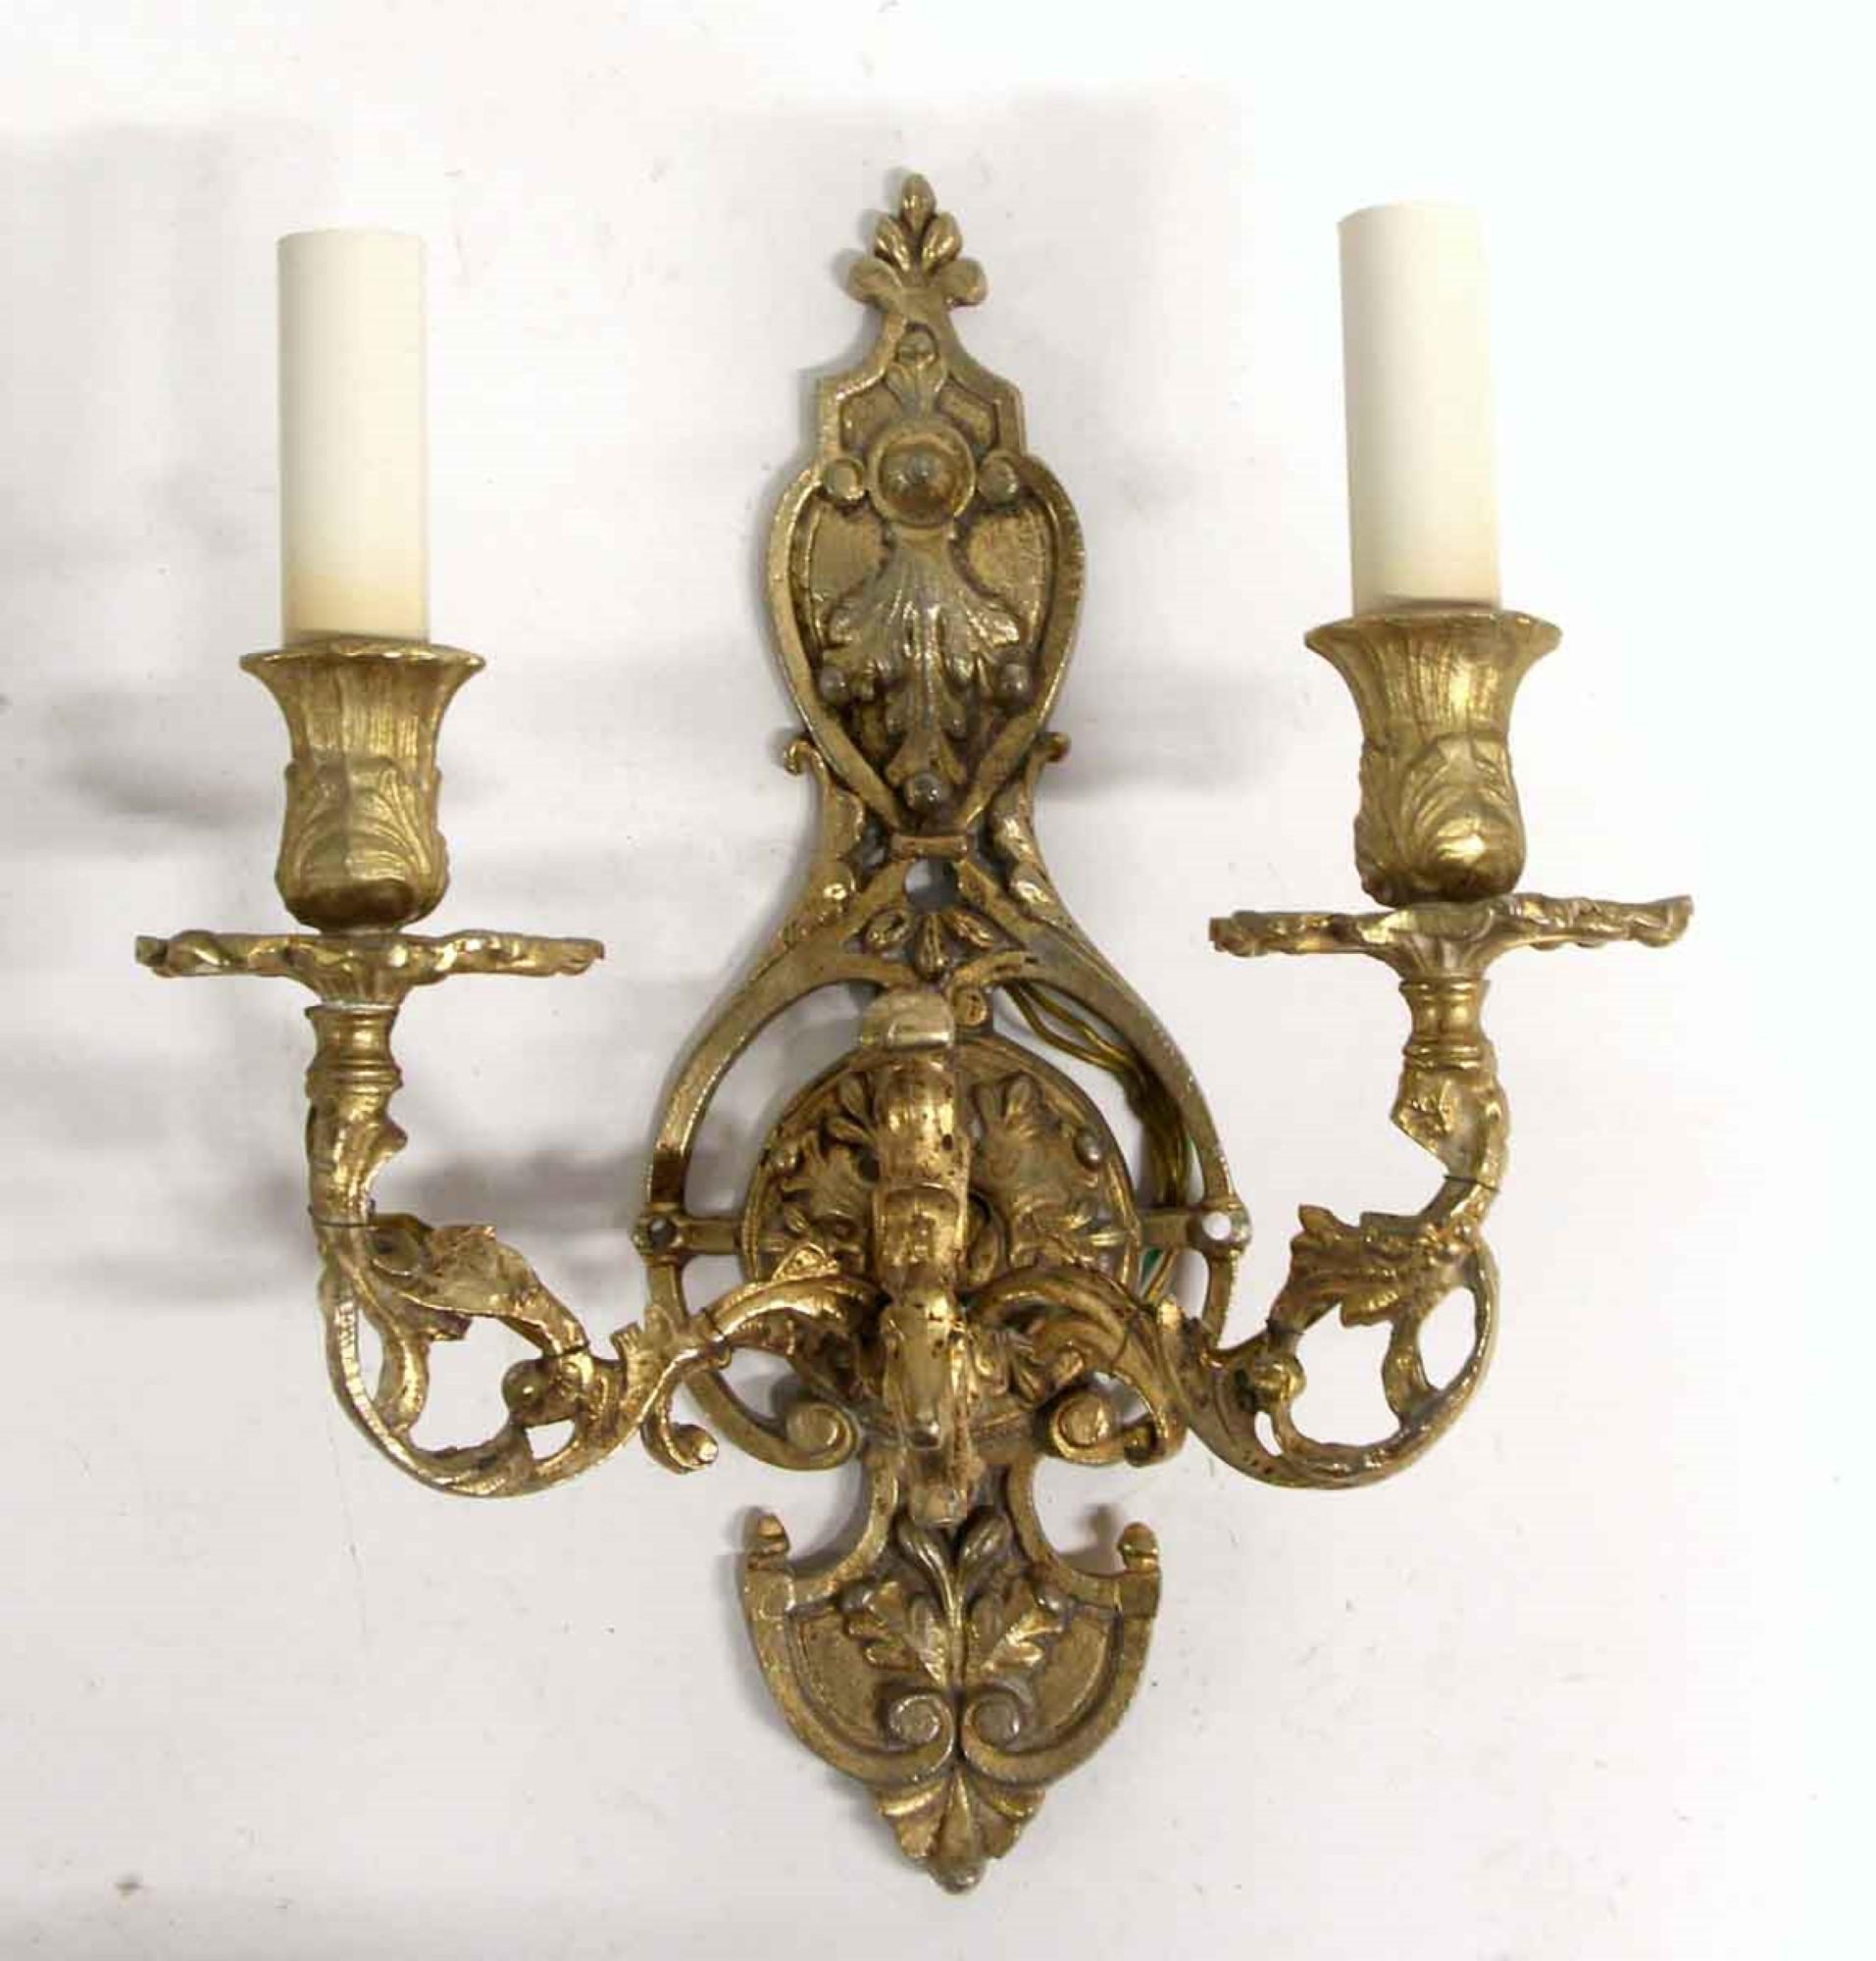 Antique 1960s French two arm ornate sconces made from cast brass. Priced as a pair. This can be seen at our 400 Gilligan St location in Scranton. PA.